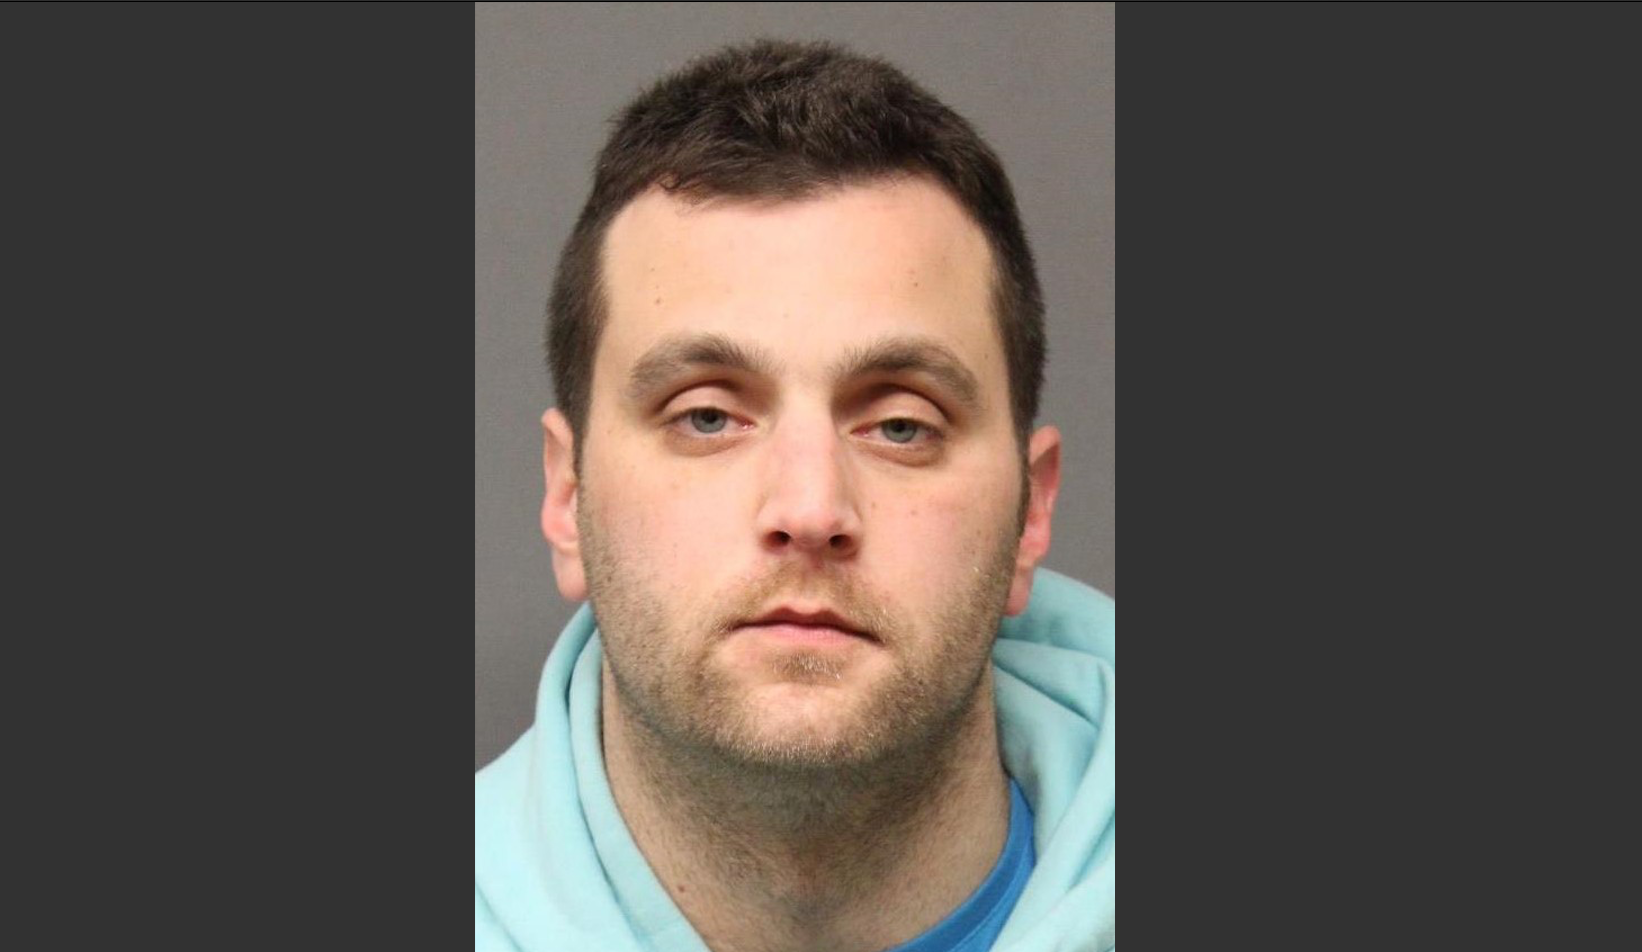 Township man adds child porn to his list of charges over meth, Xanax, GHB — Pascack Press and Northern Valley Press